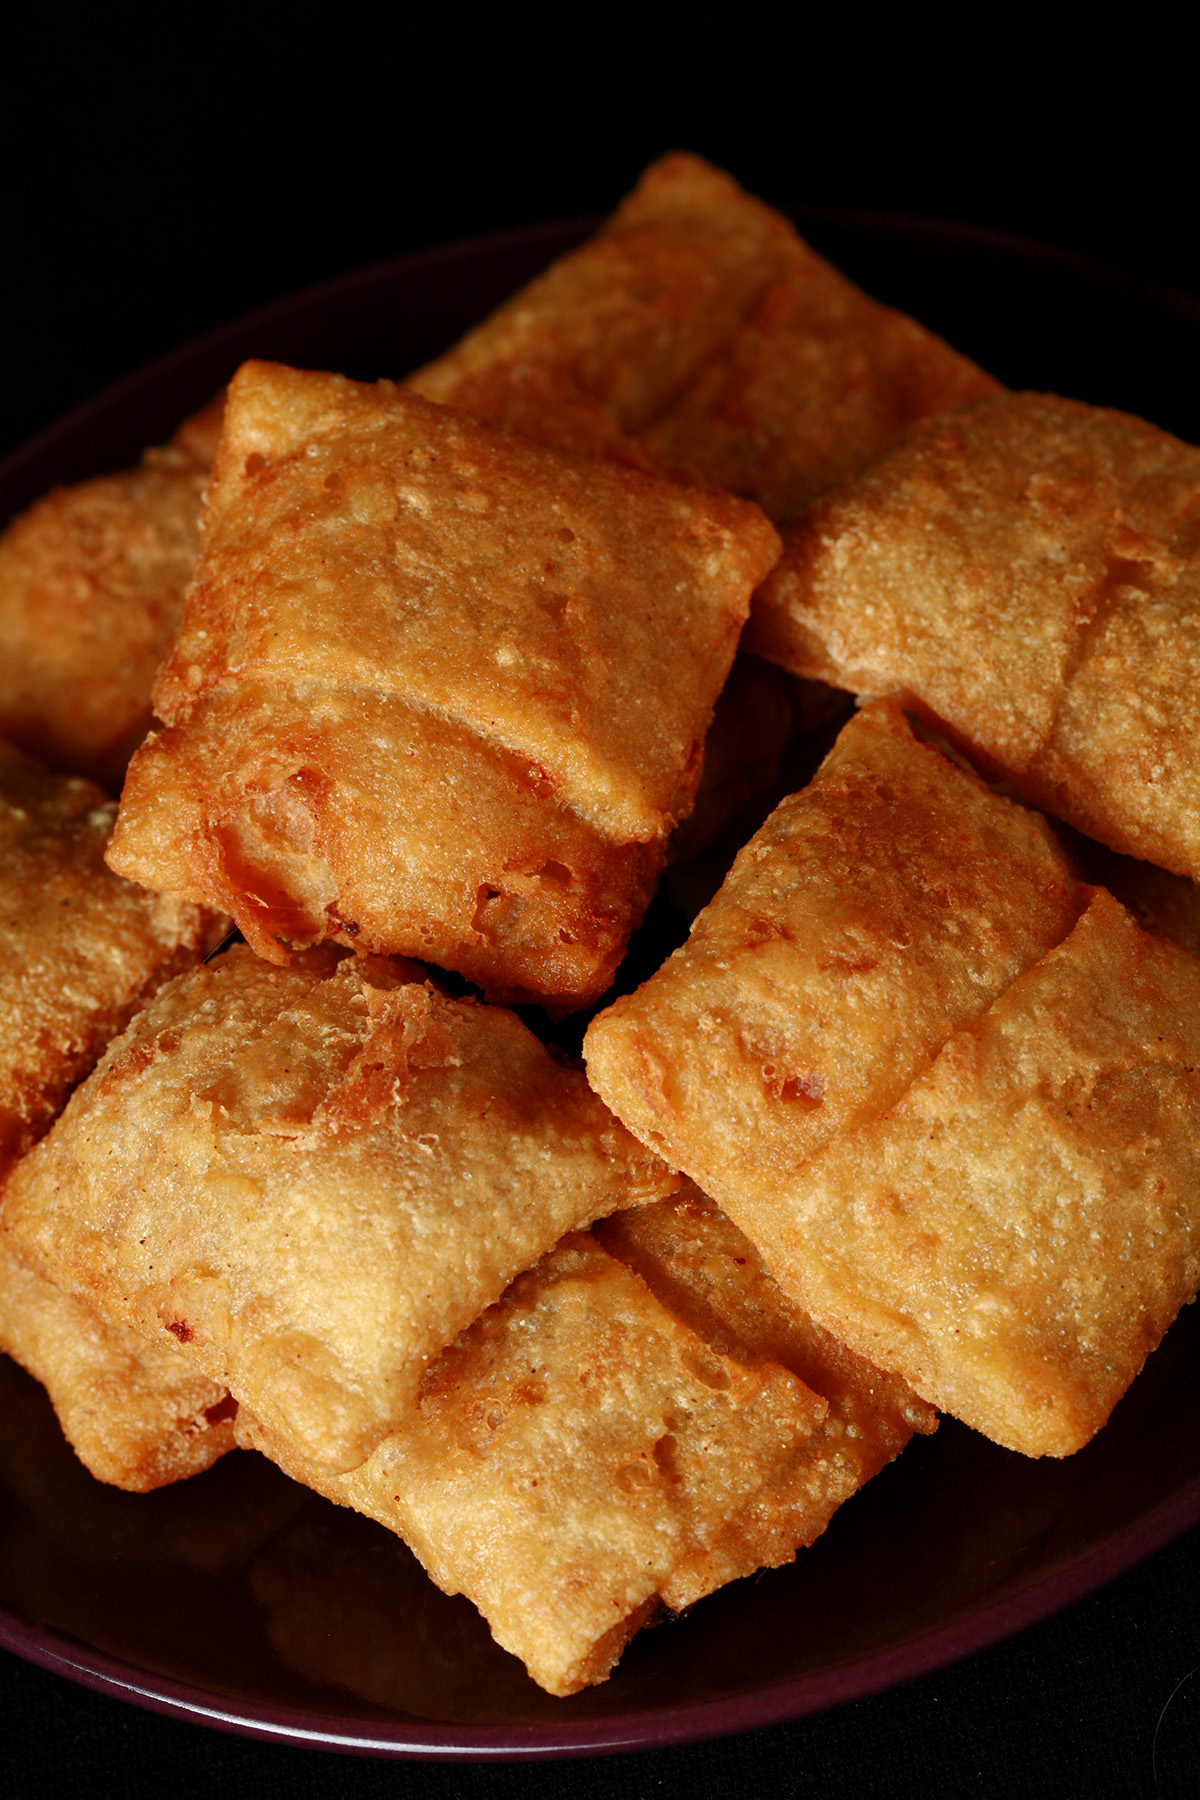 A plate with a pile of gluten-free pizza bites.